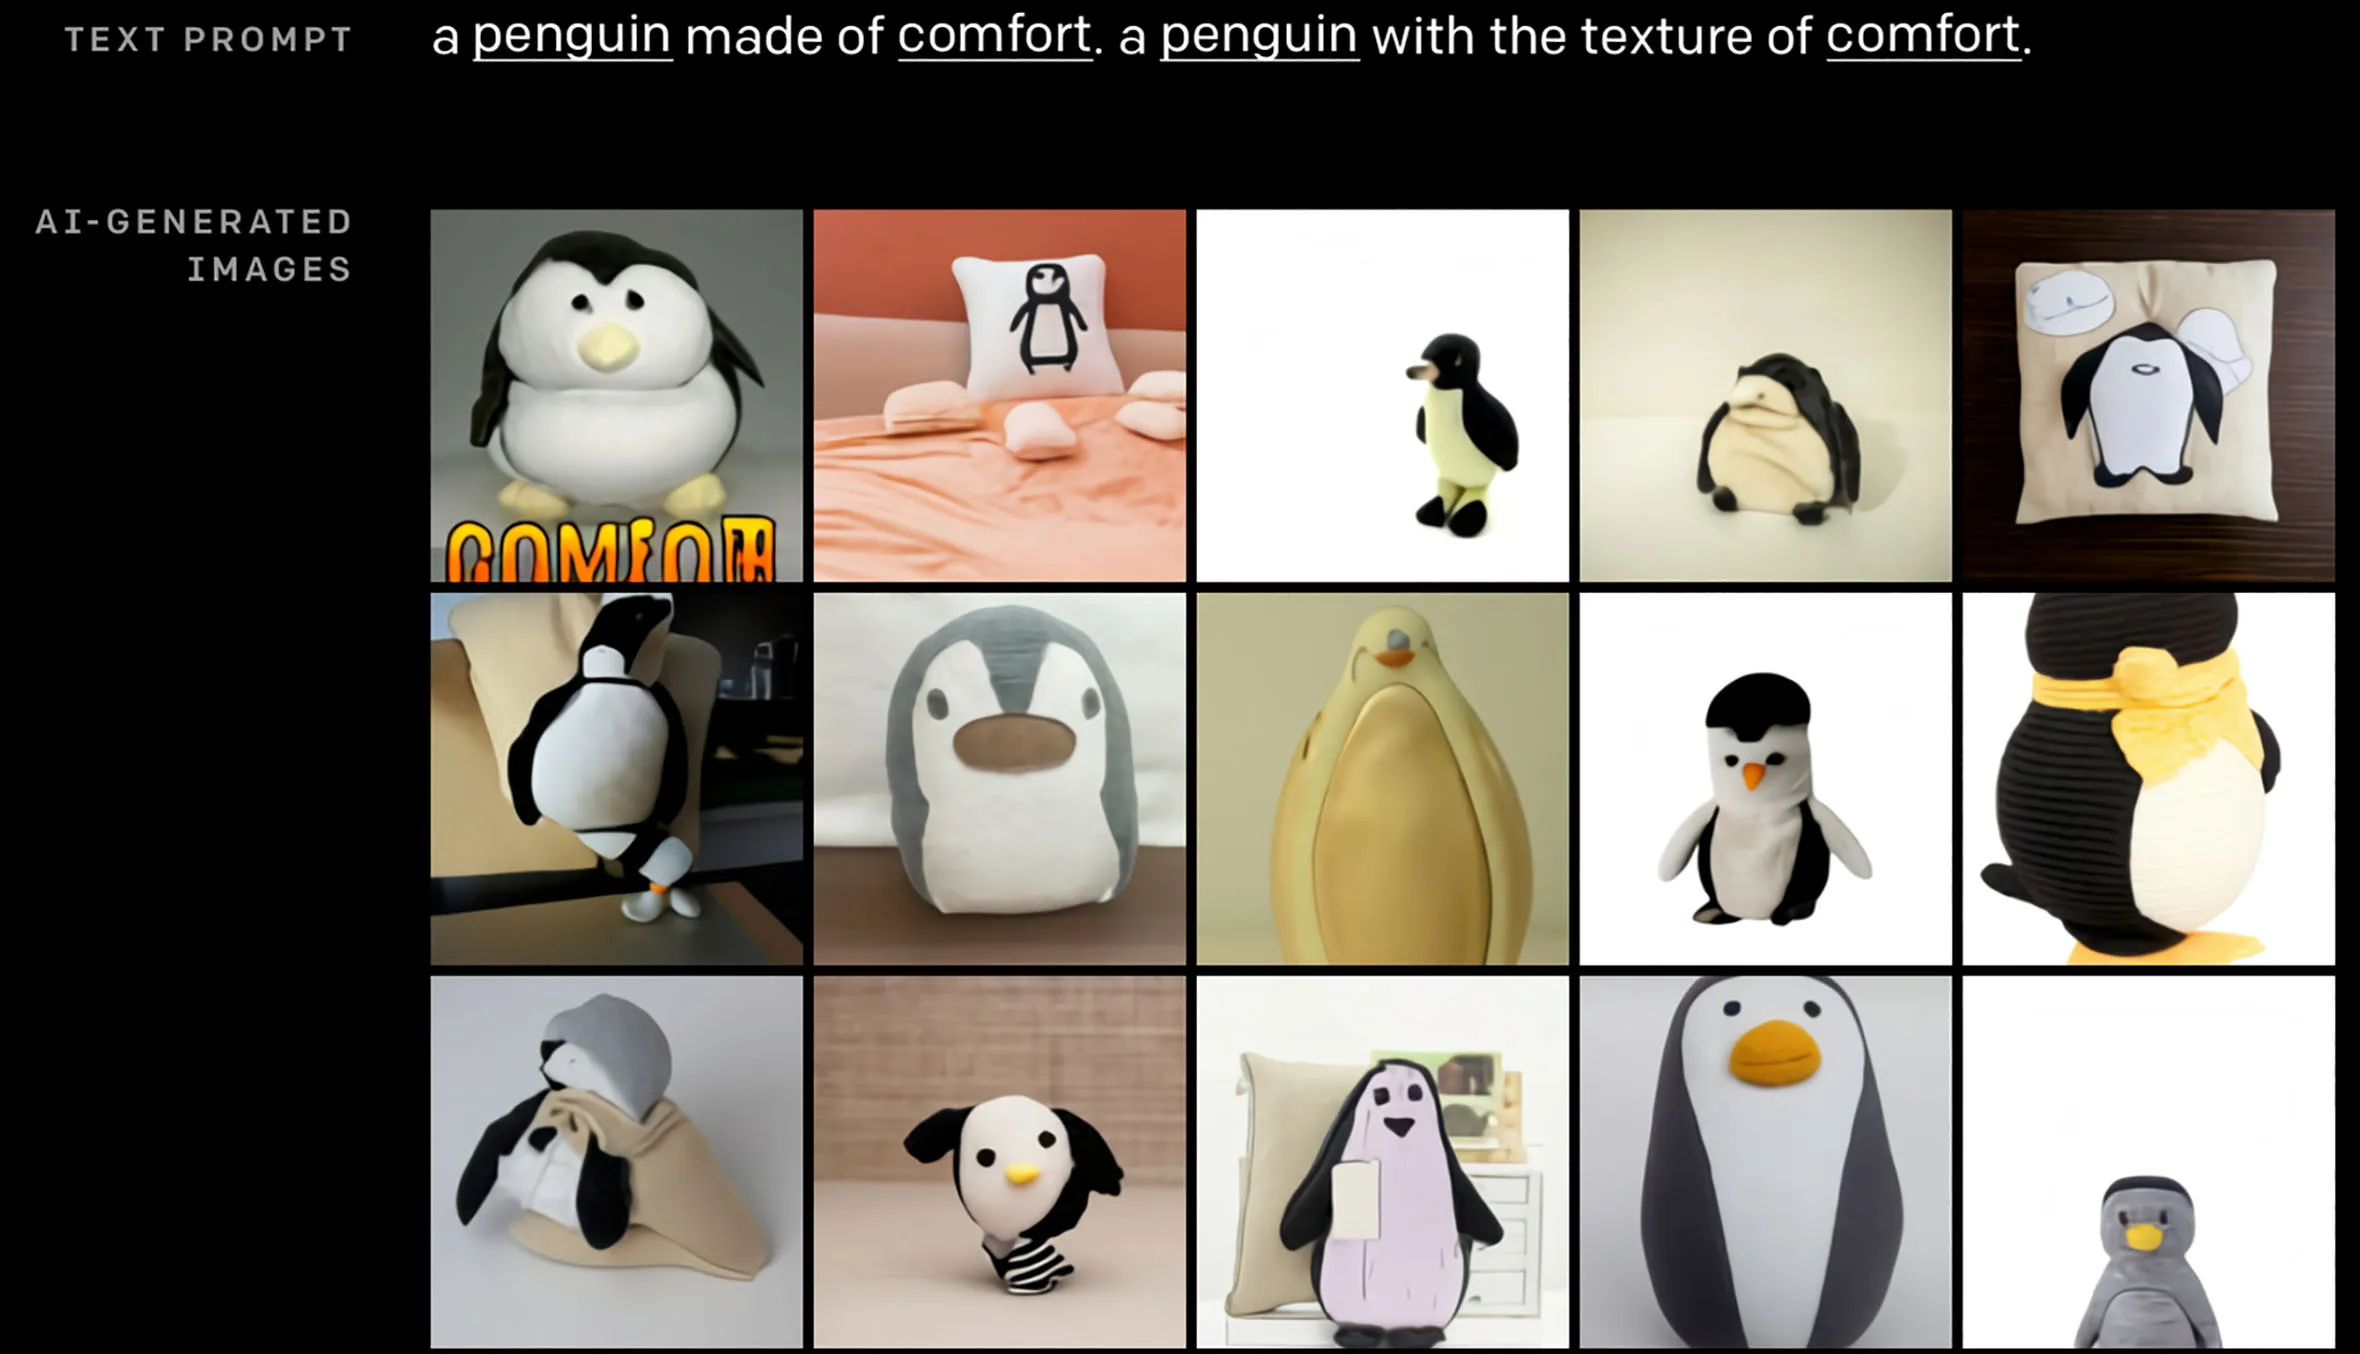 Penguins generated by DALL-E in 2021